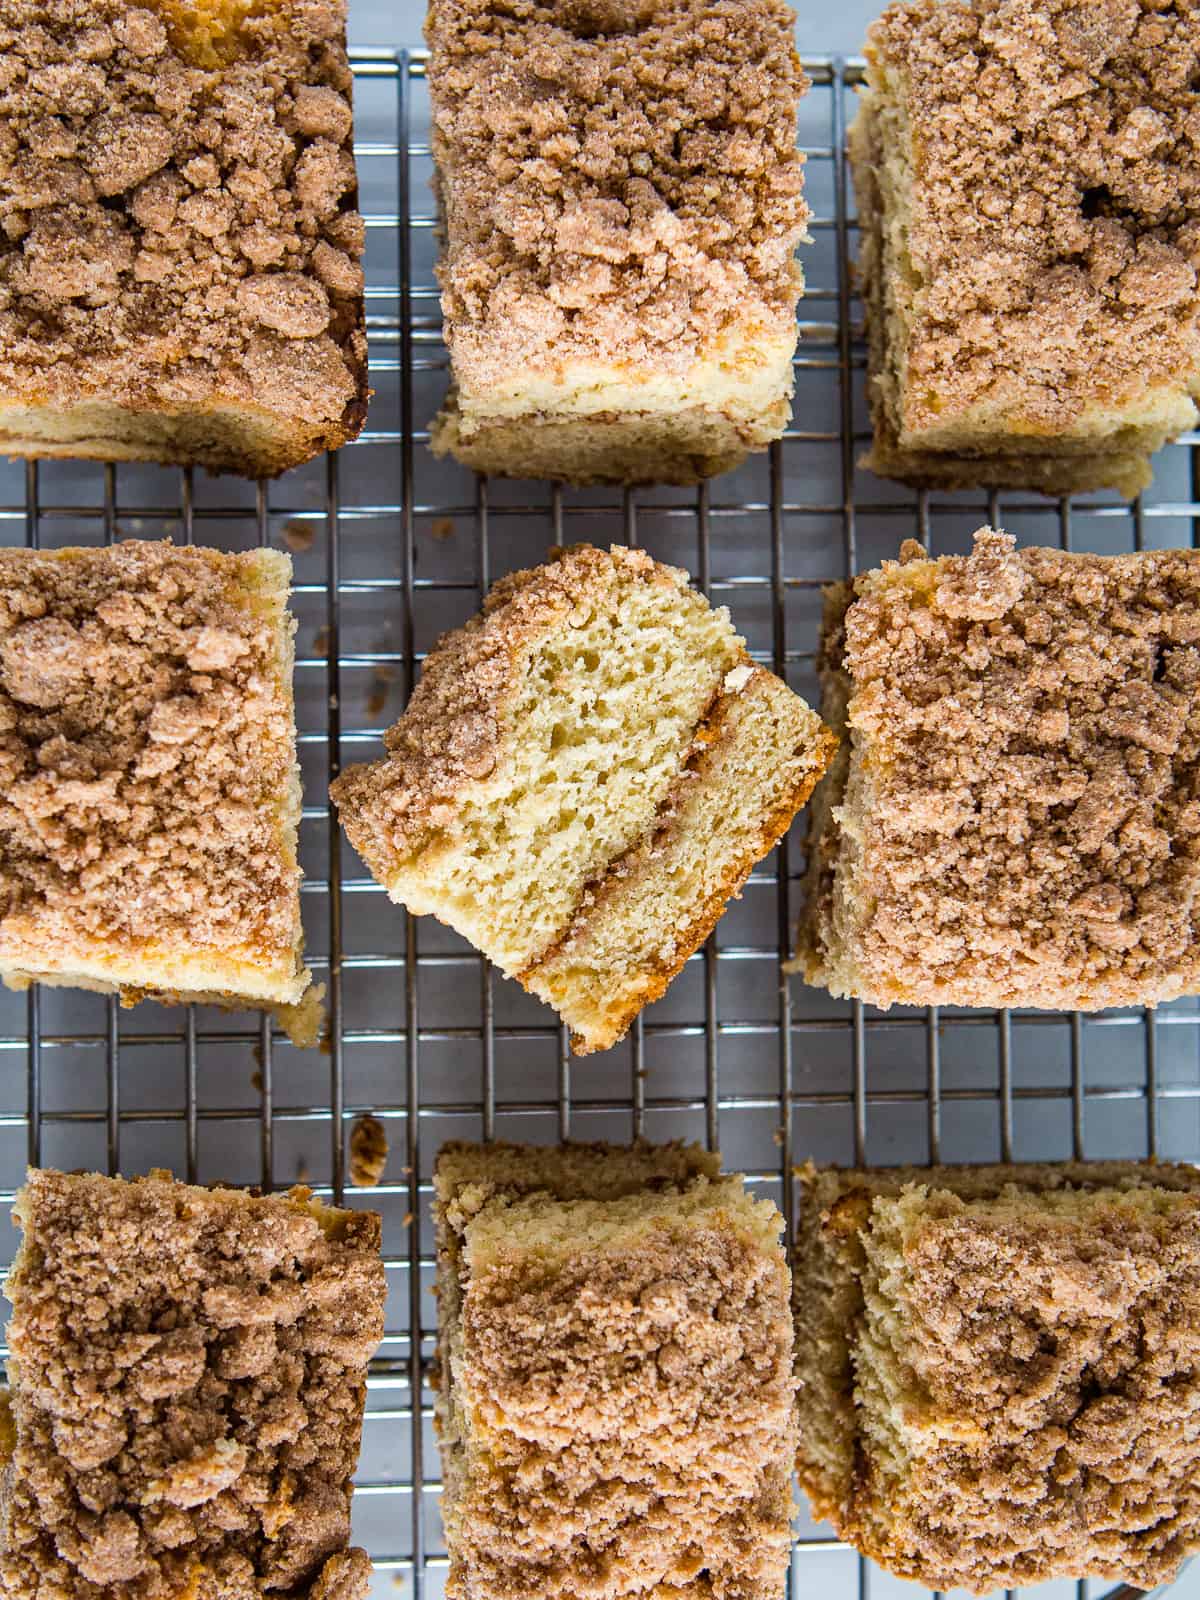 Slices of gluten-free coffee cake on a cooling rack.